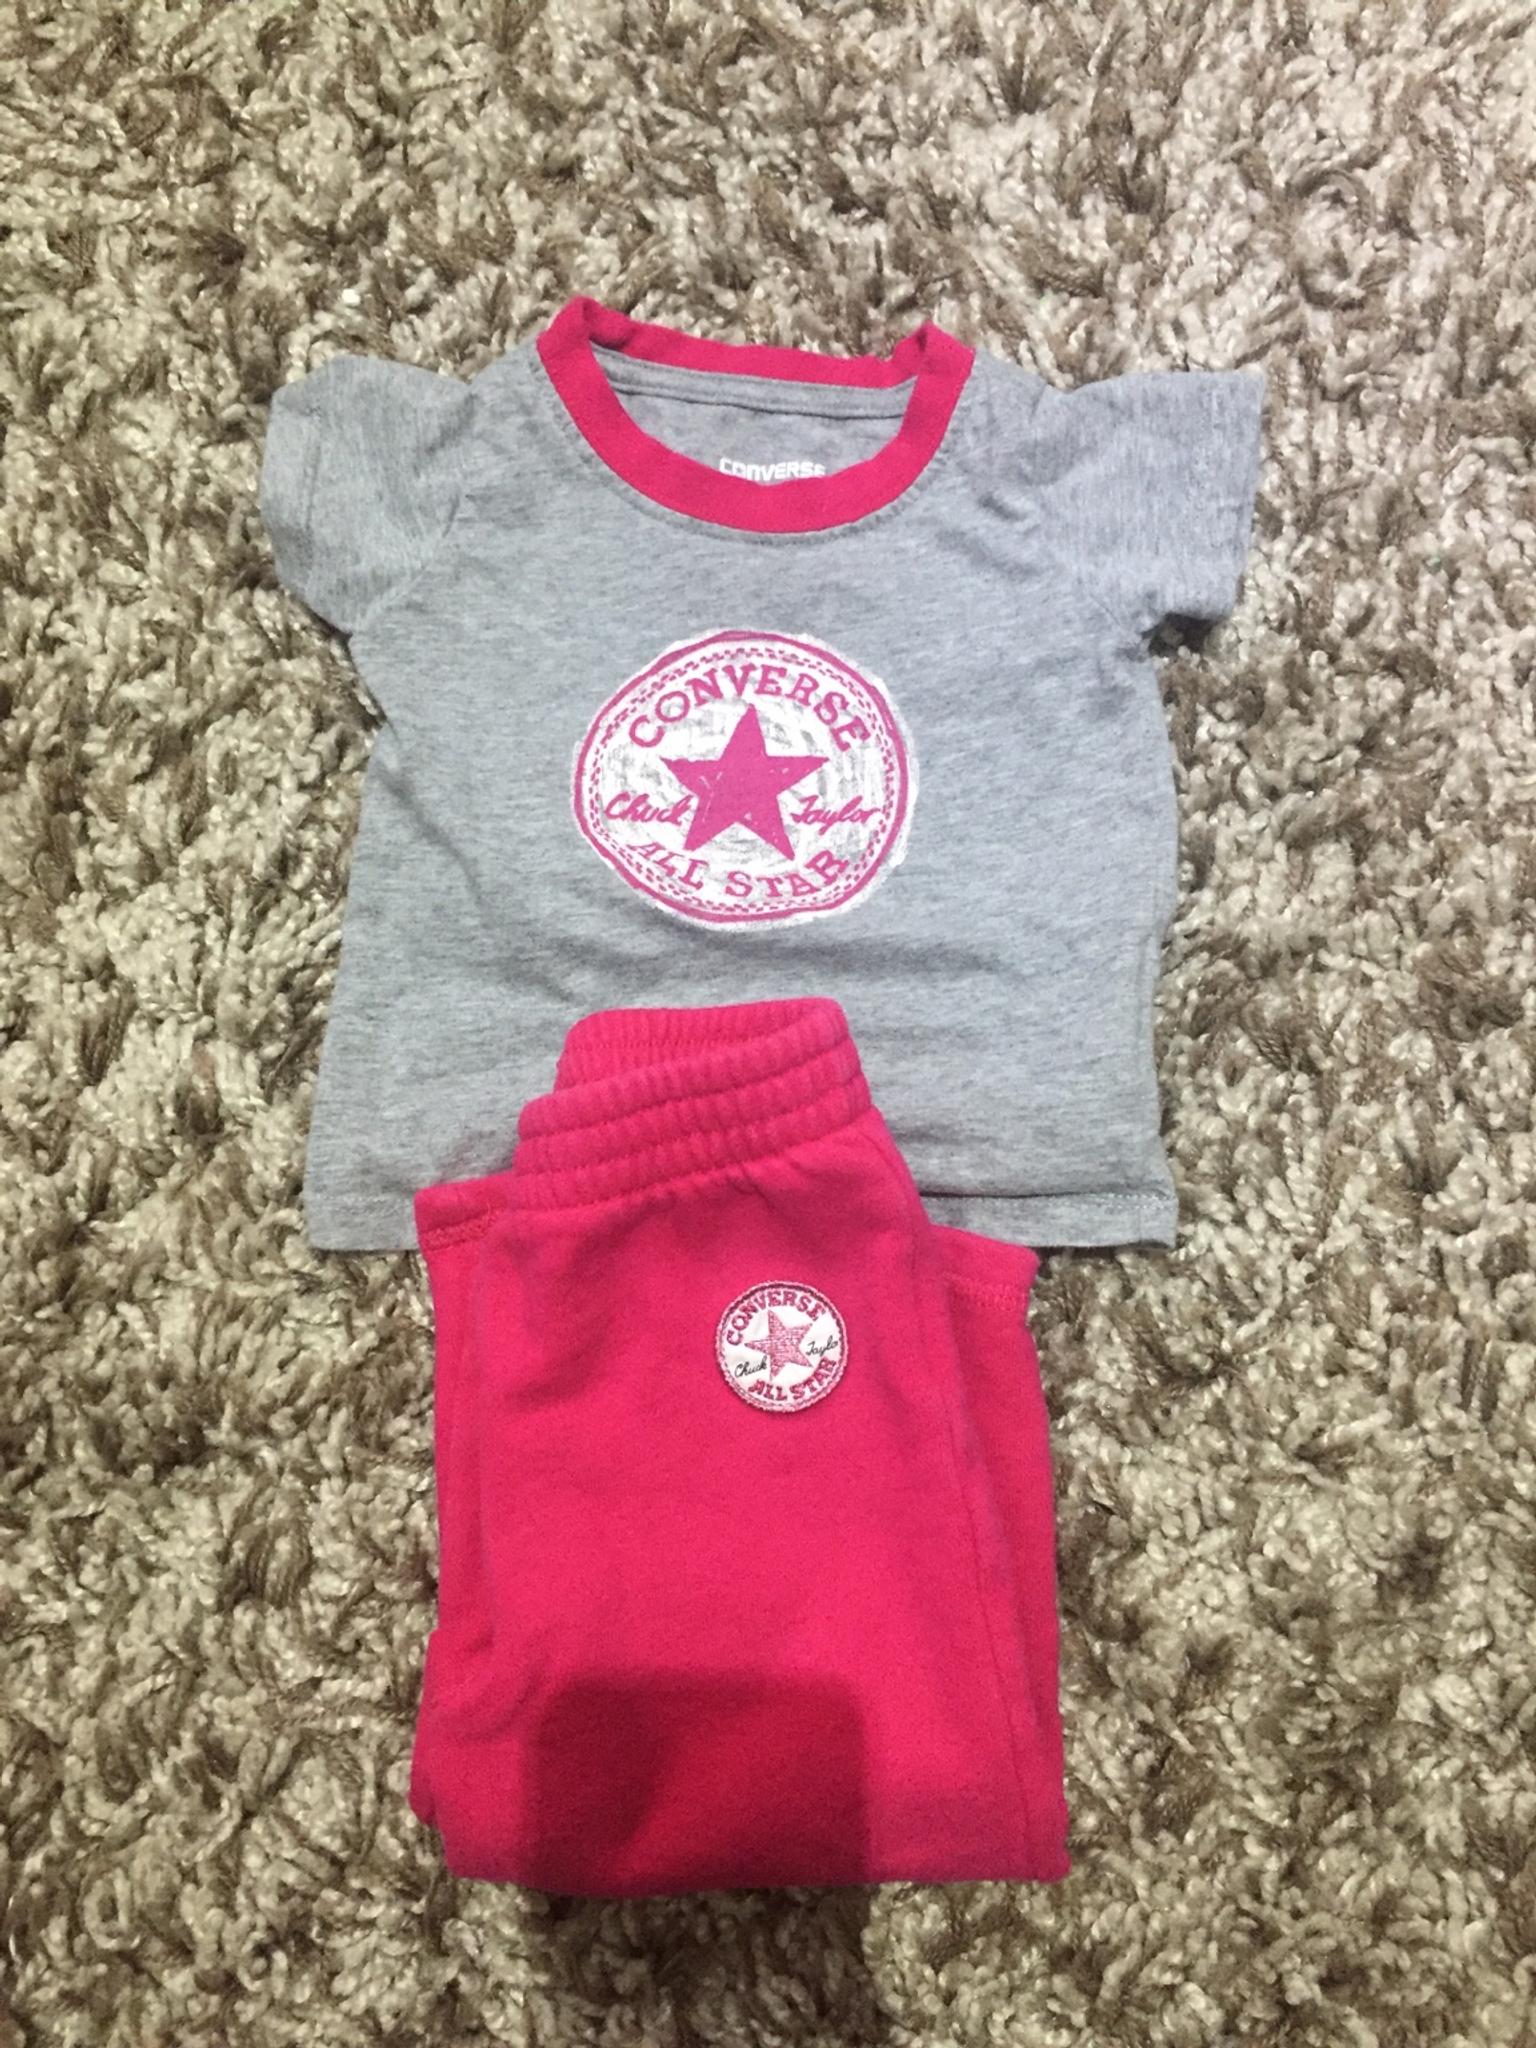 CONVERSE TRACKSUIT SET 18-24 months in PR1 Ribble for £5.00 for sale |  Shpock